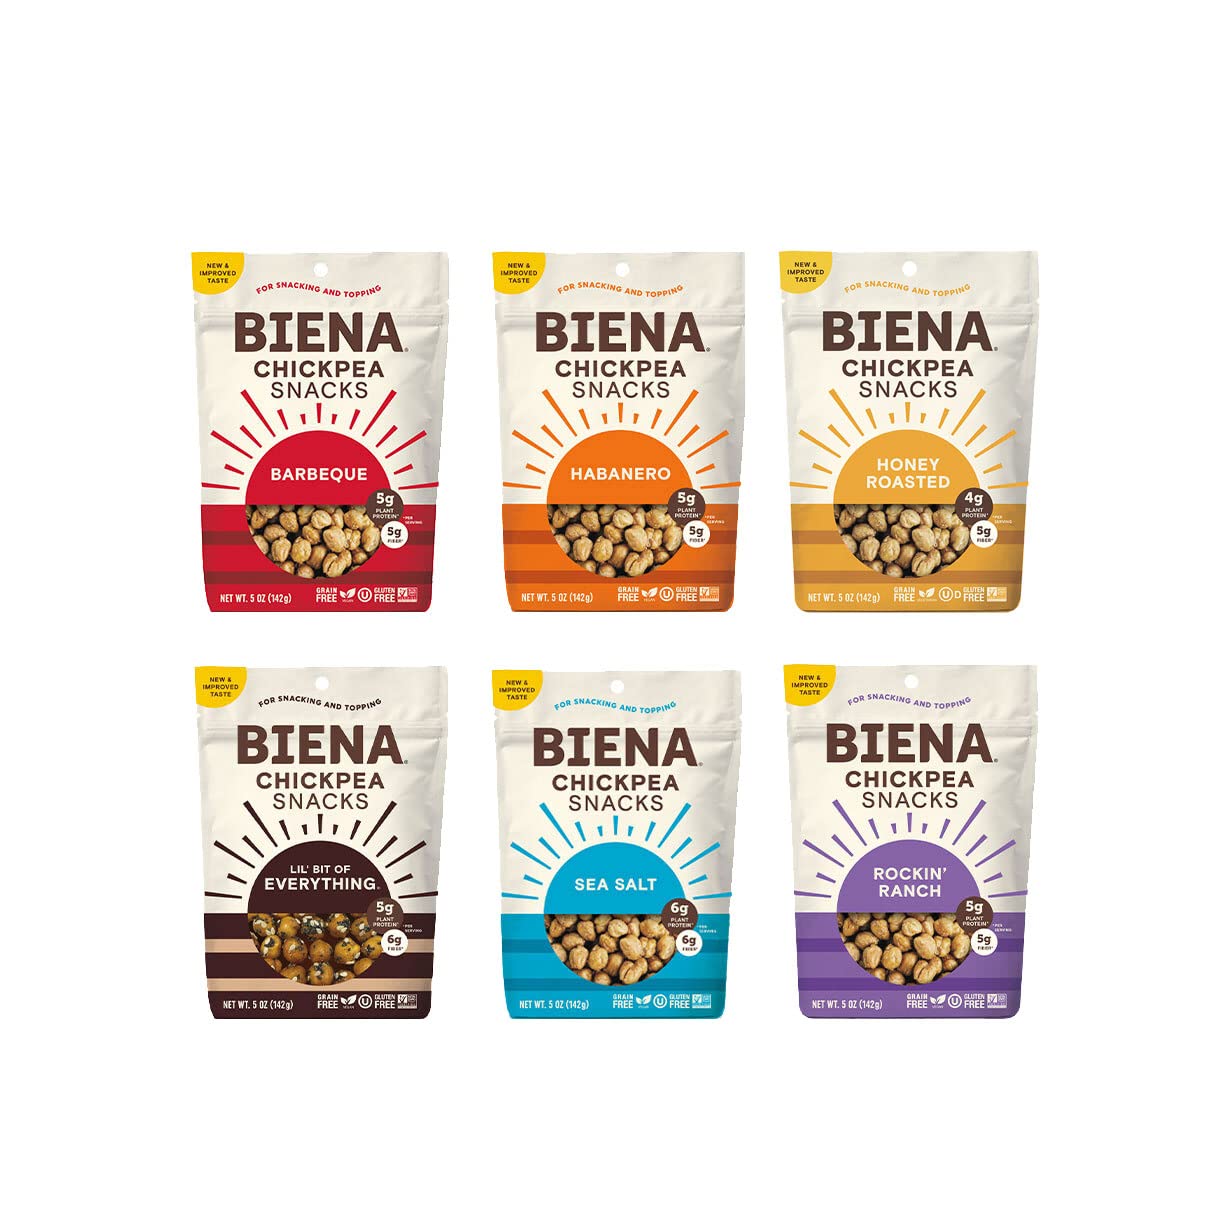 Biena Crispy Roasted Chickpea Snacks - Habanero, High Protein Snacks, High Fiber Snacks, Gluten Free, Plant-Based, Allergy Friendly, Non-GMO, 4-Pack 5 Ounce Bags